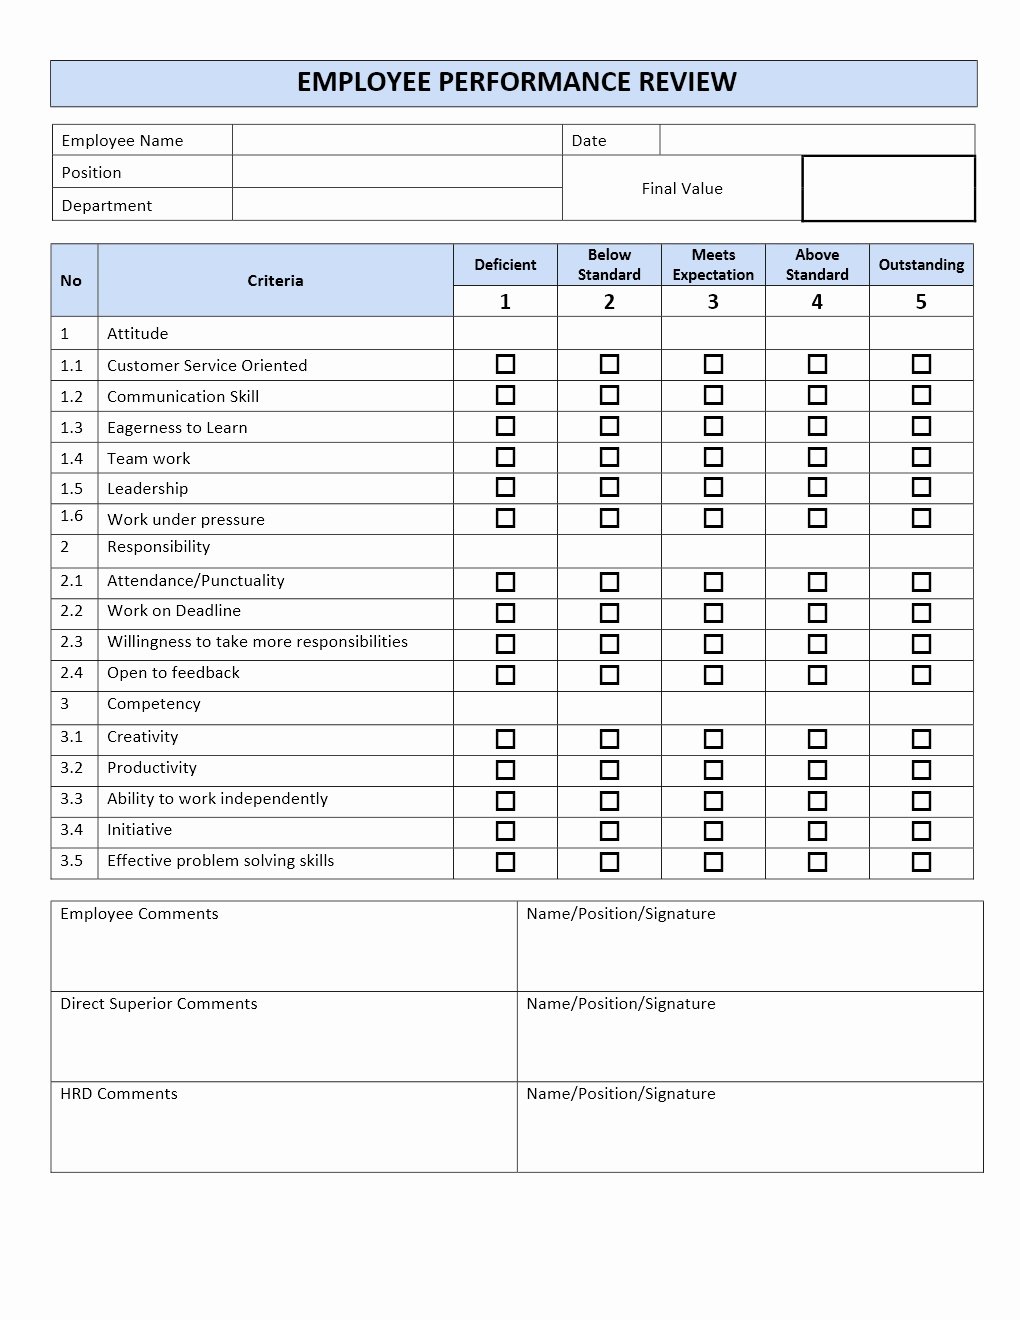 Employee Performance Review Template Word Lovely Employee Performance Review form